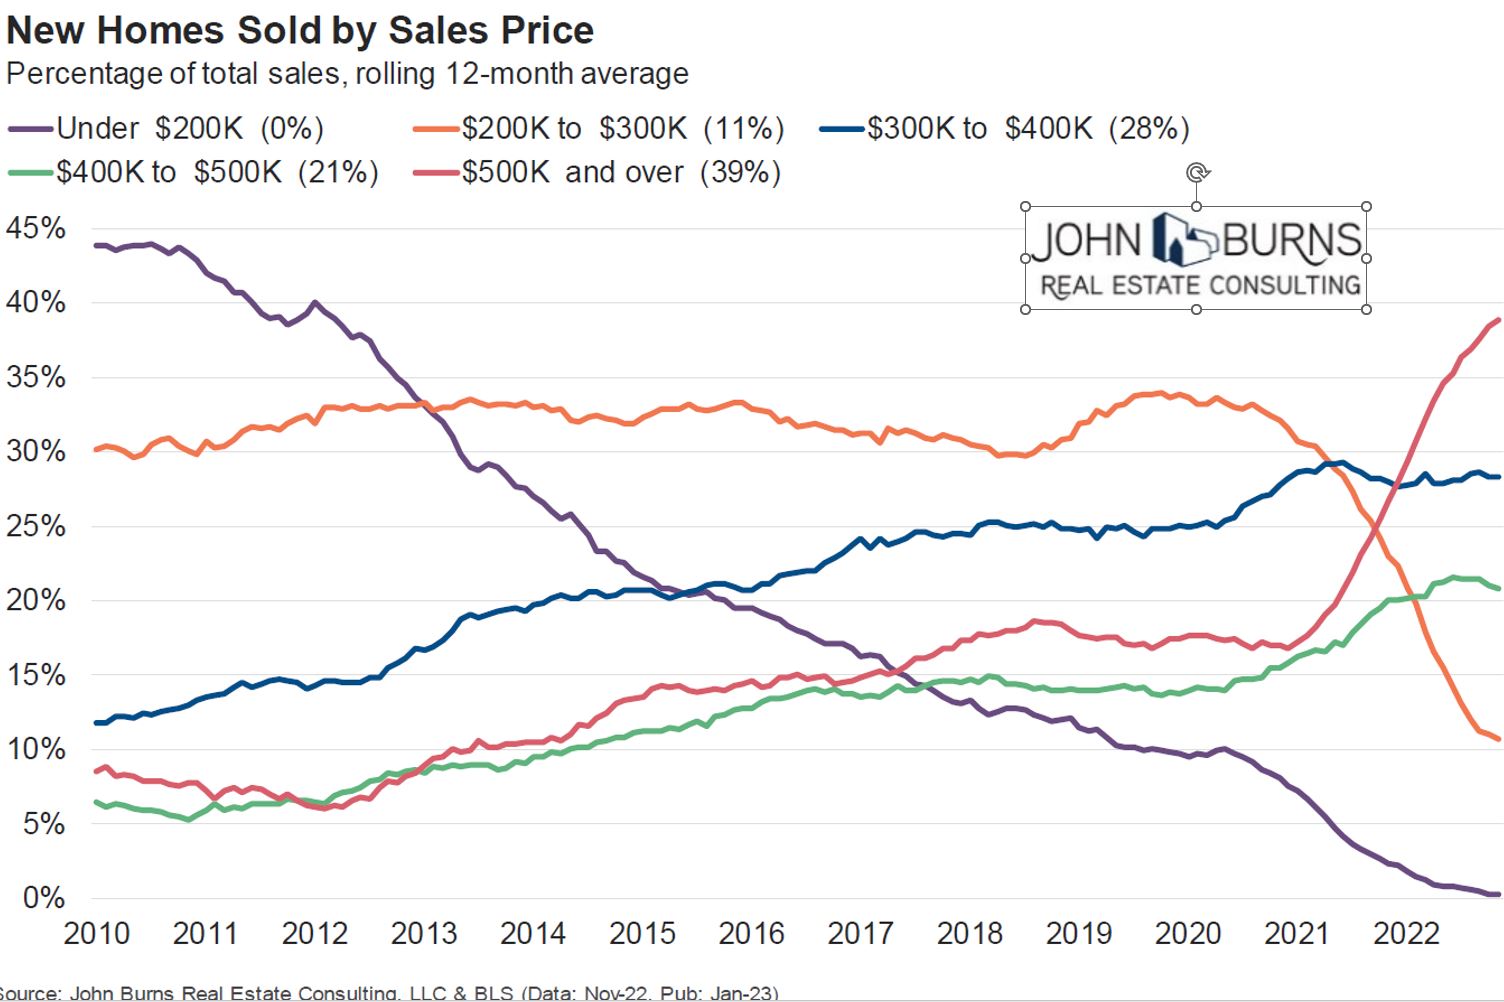 New Homes Sold by Sales Price 